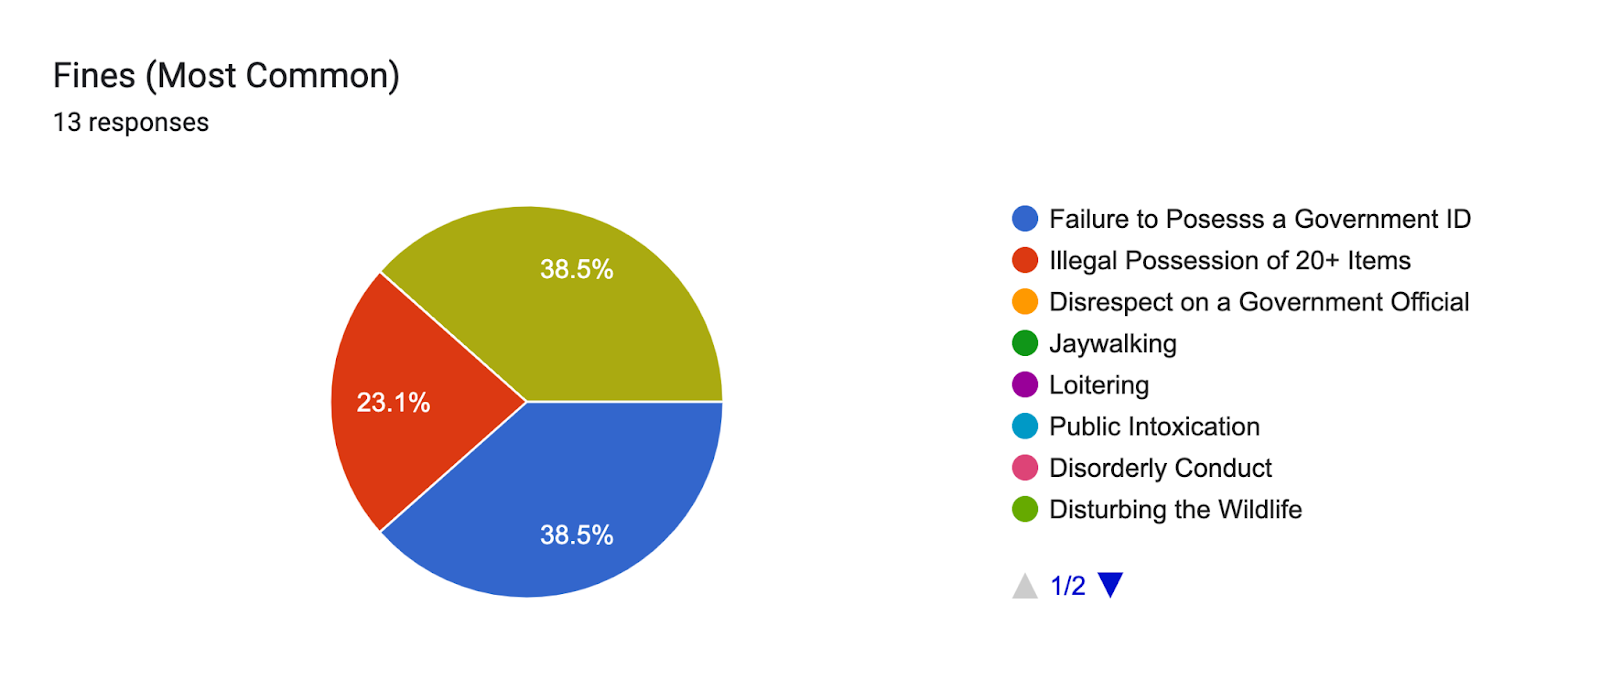 Forms response chart. Question title: Fines (Most Common). Number of responses: 13 responses.